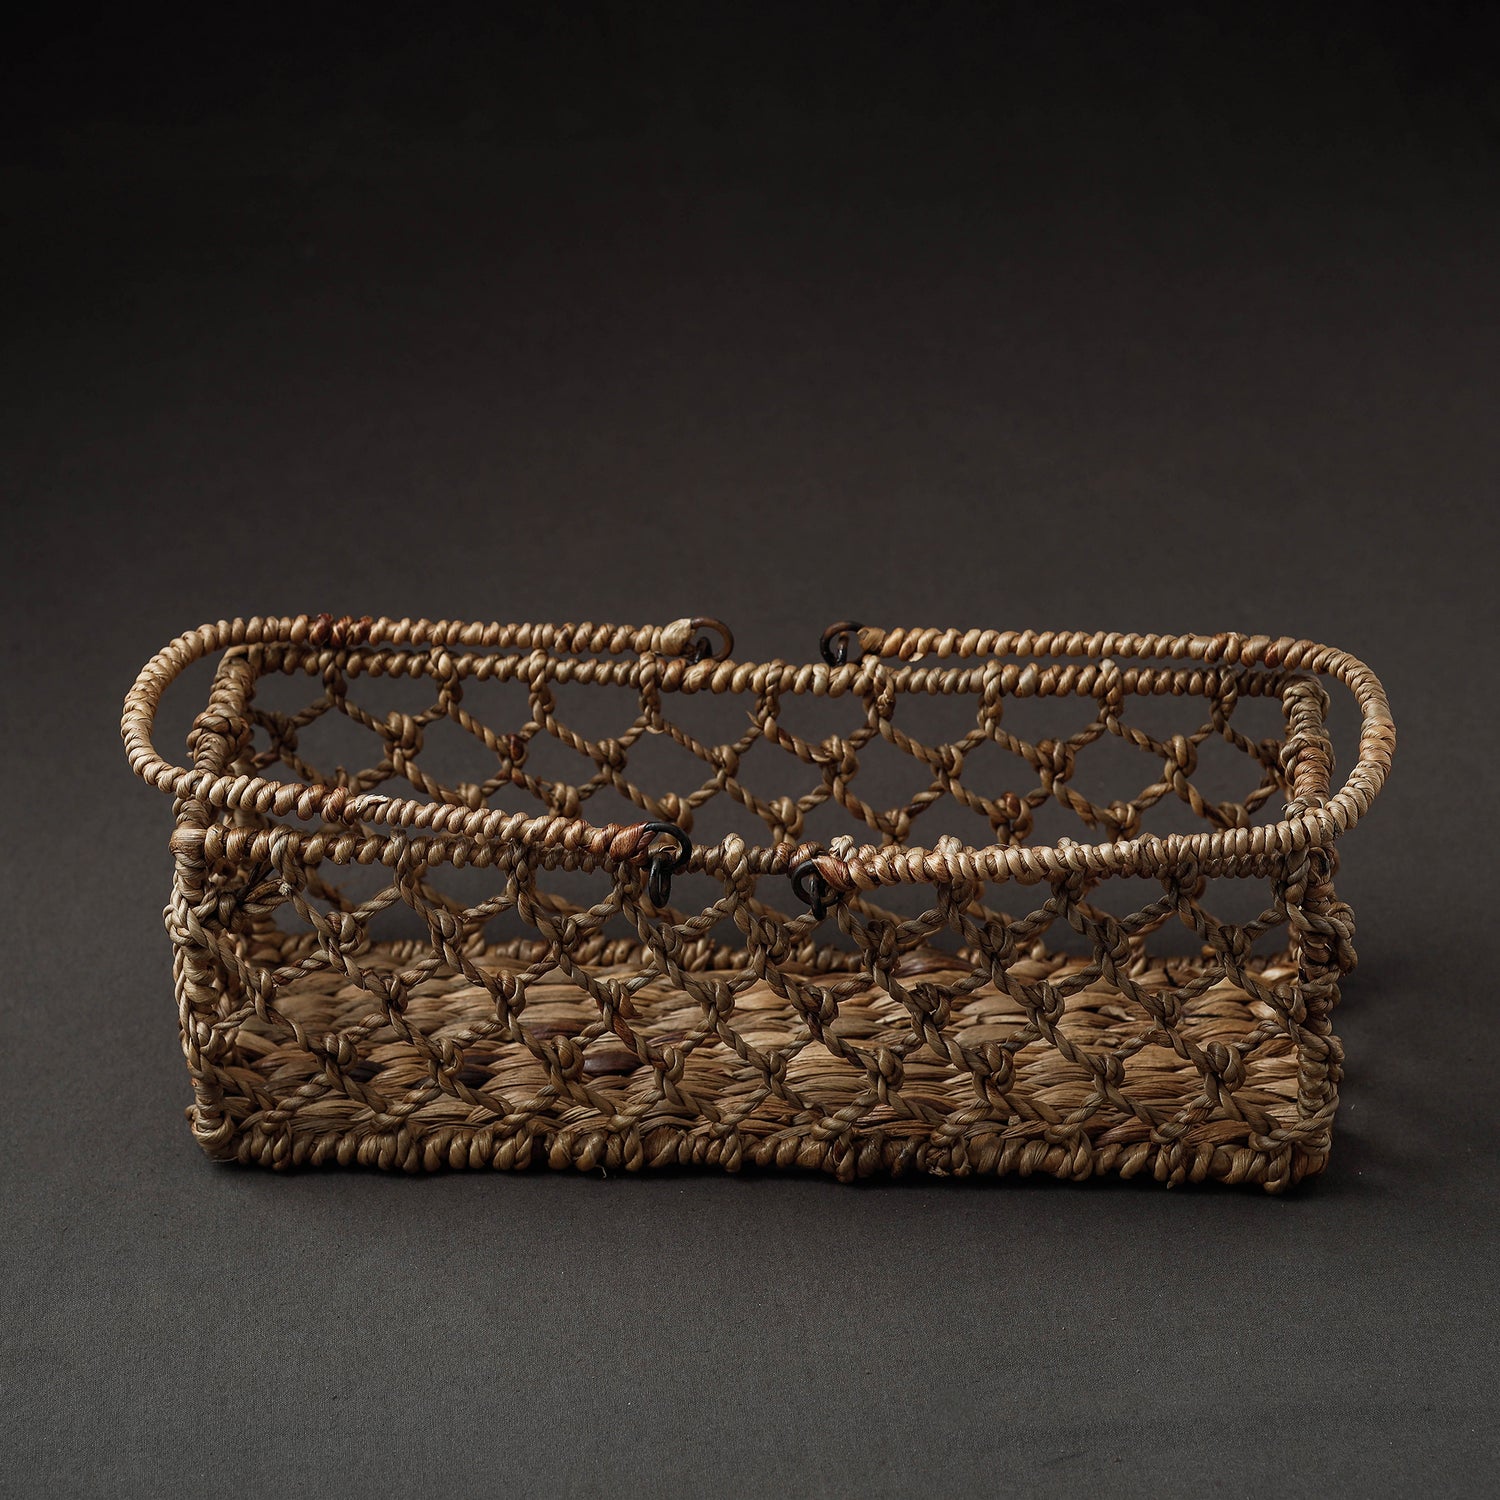 Handcrafted Organic Water Hyacinth Plush Basket (12 x 4 in)